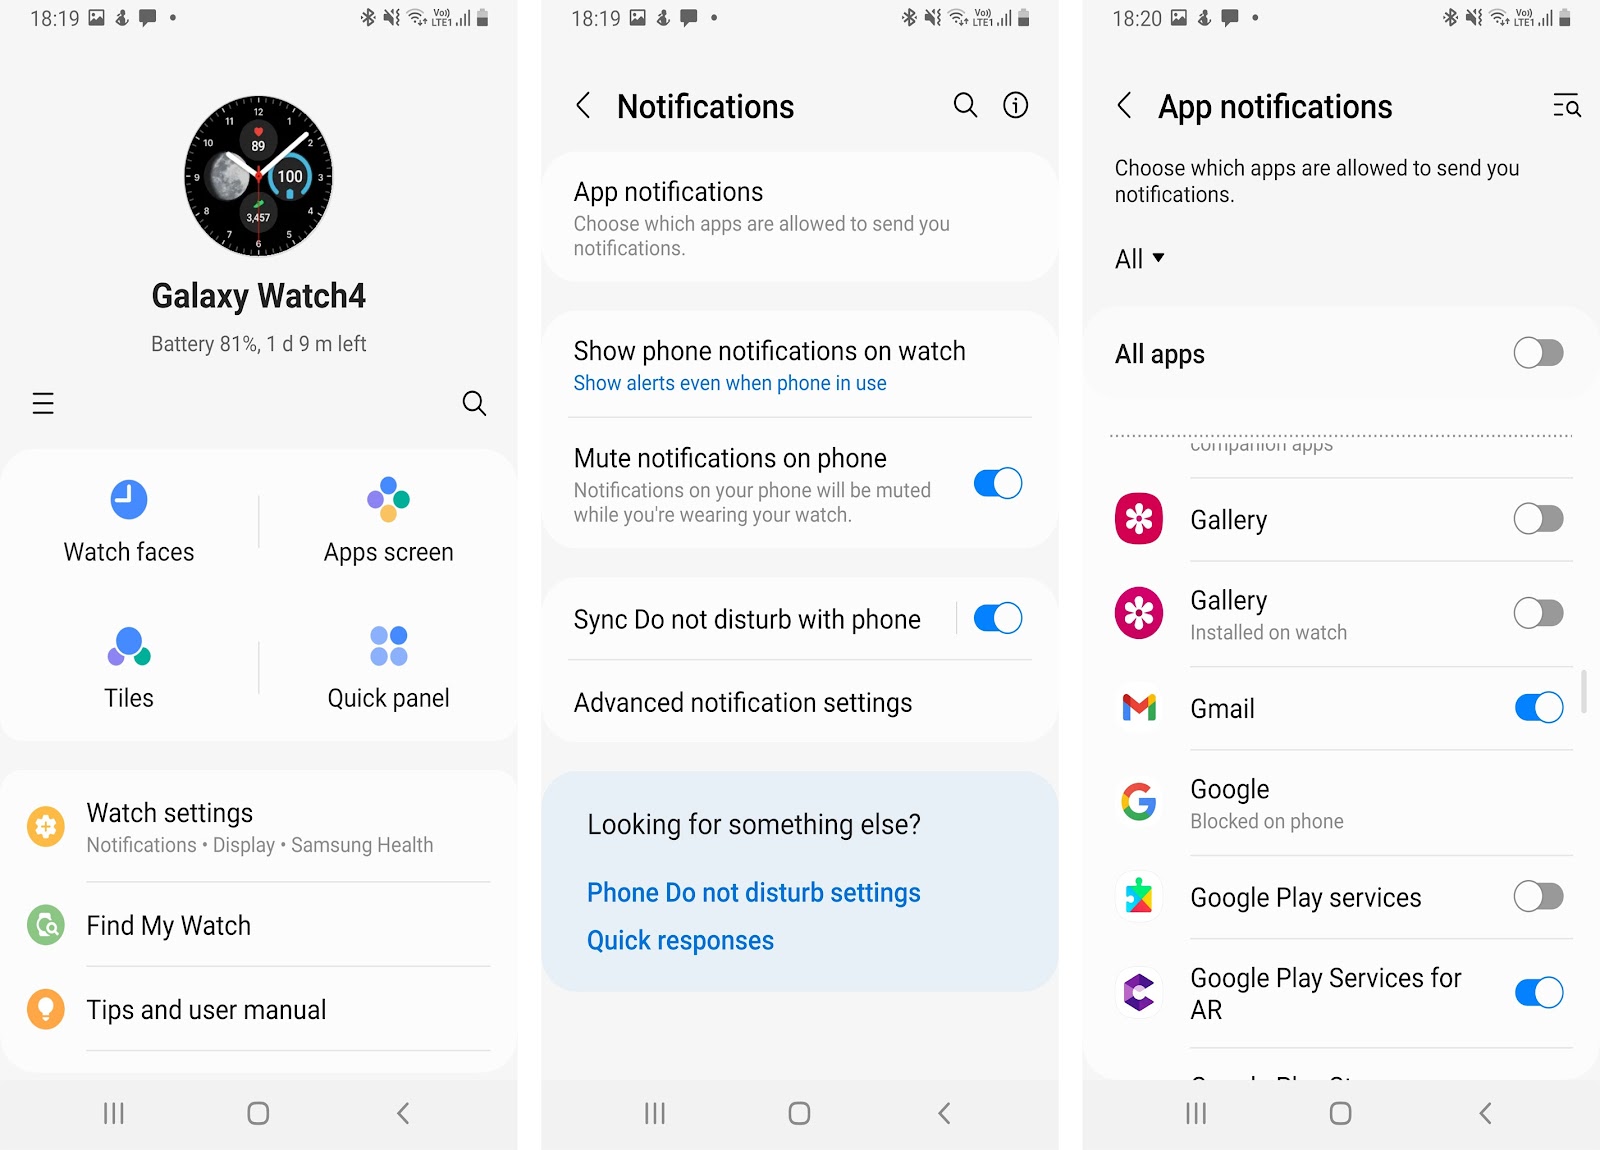 How to Enable Gmail Notifications in the Galaxy Wearable App?